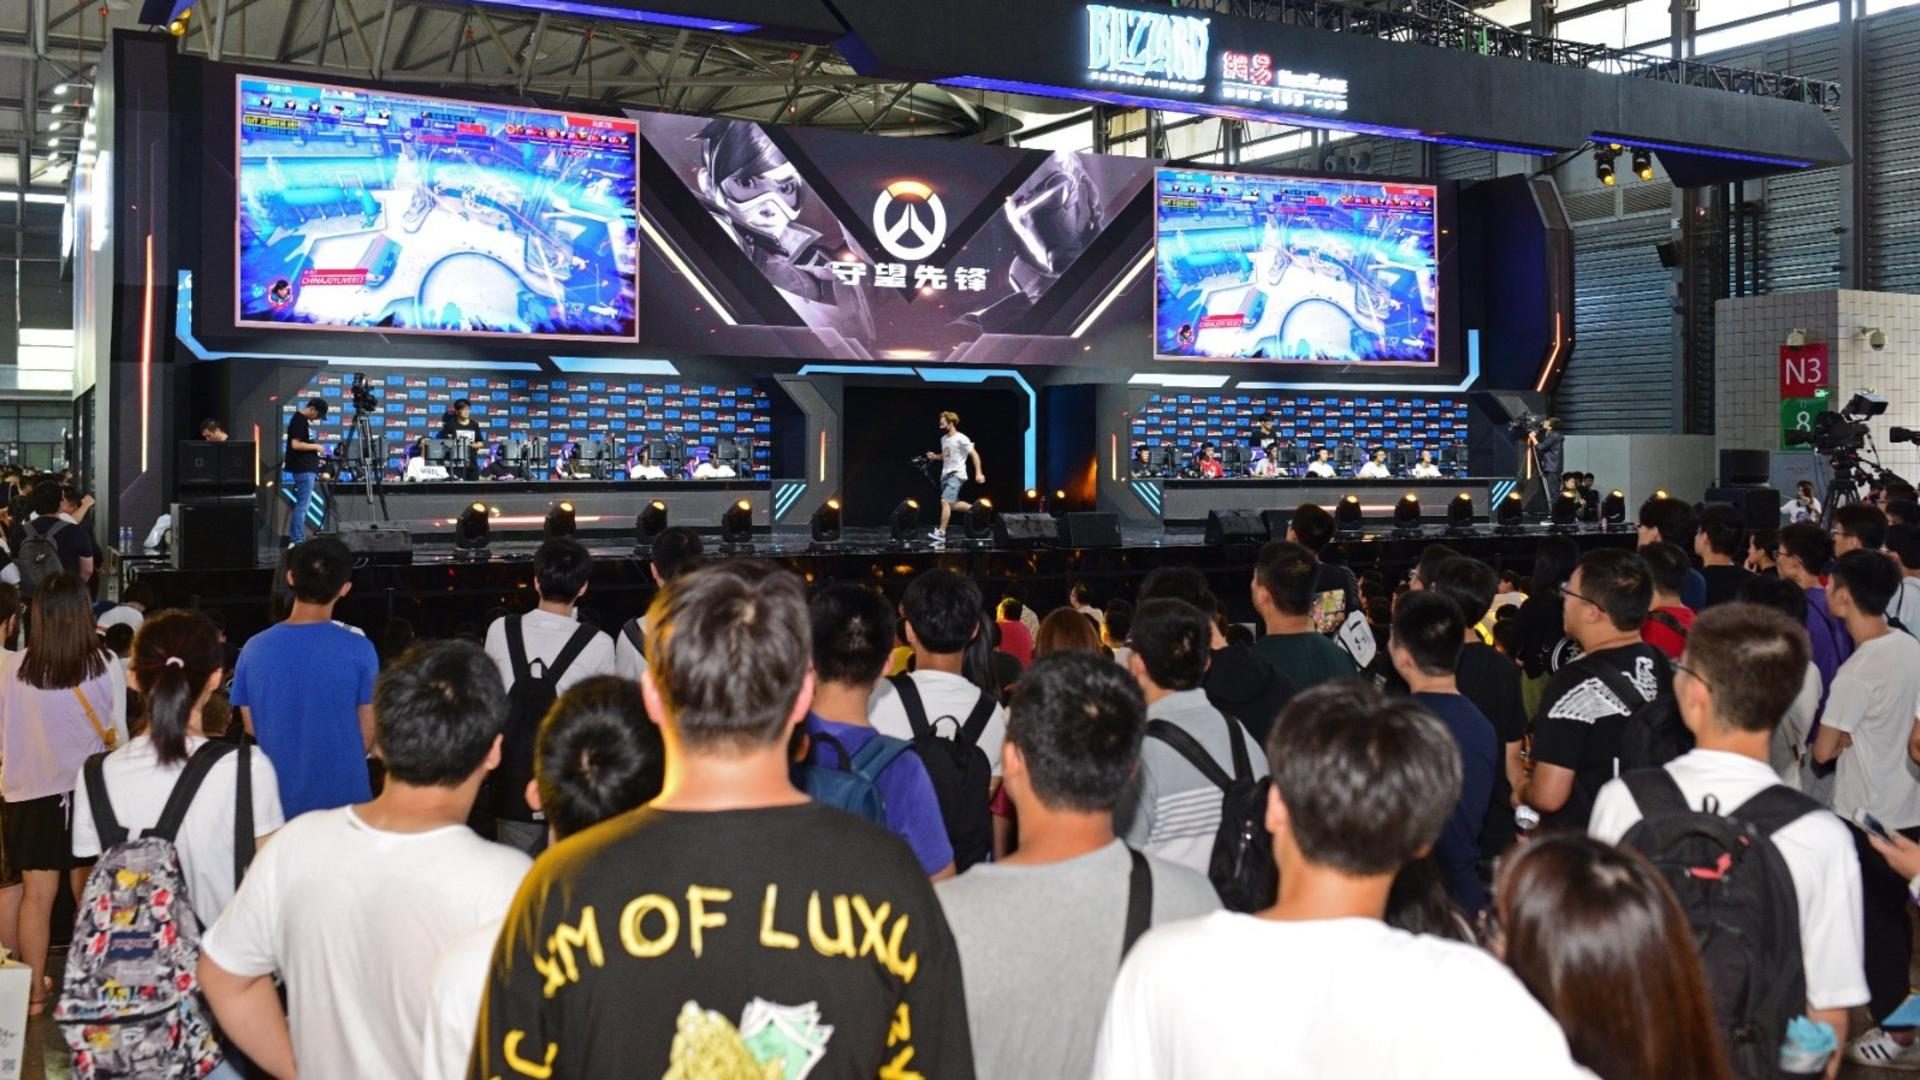 Overwatch World Cup 2023: Get schedule, teams, format, prize pool and watch  live streaming